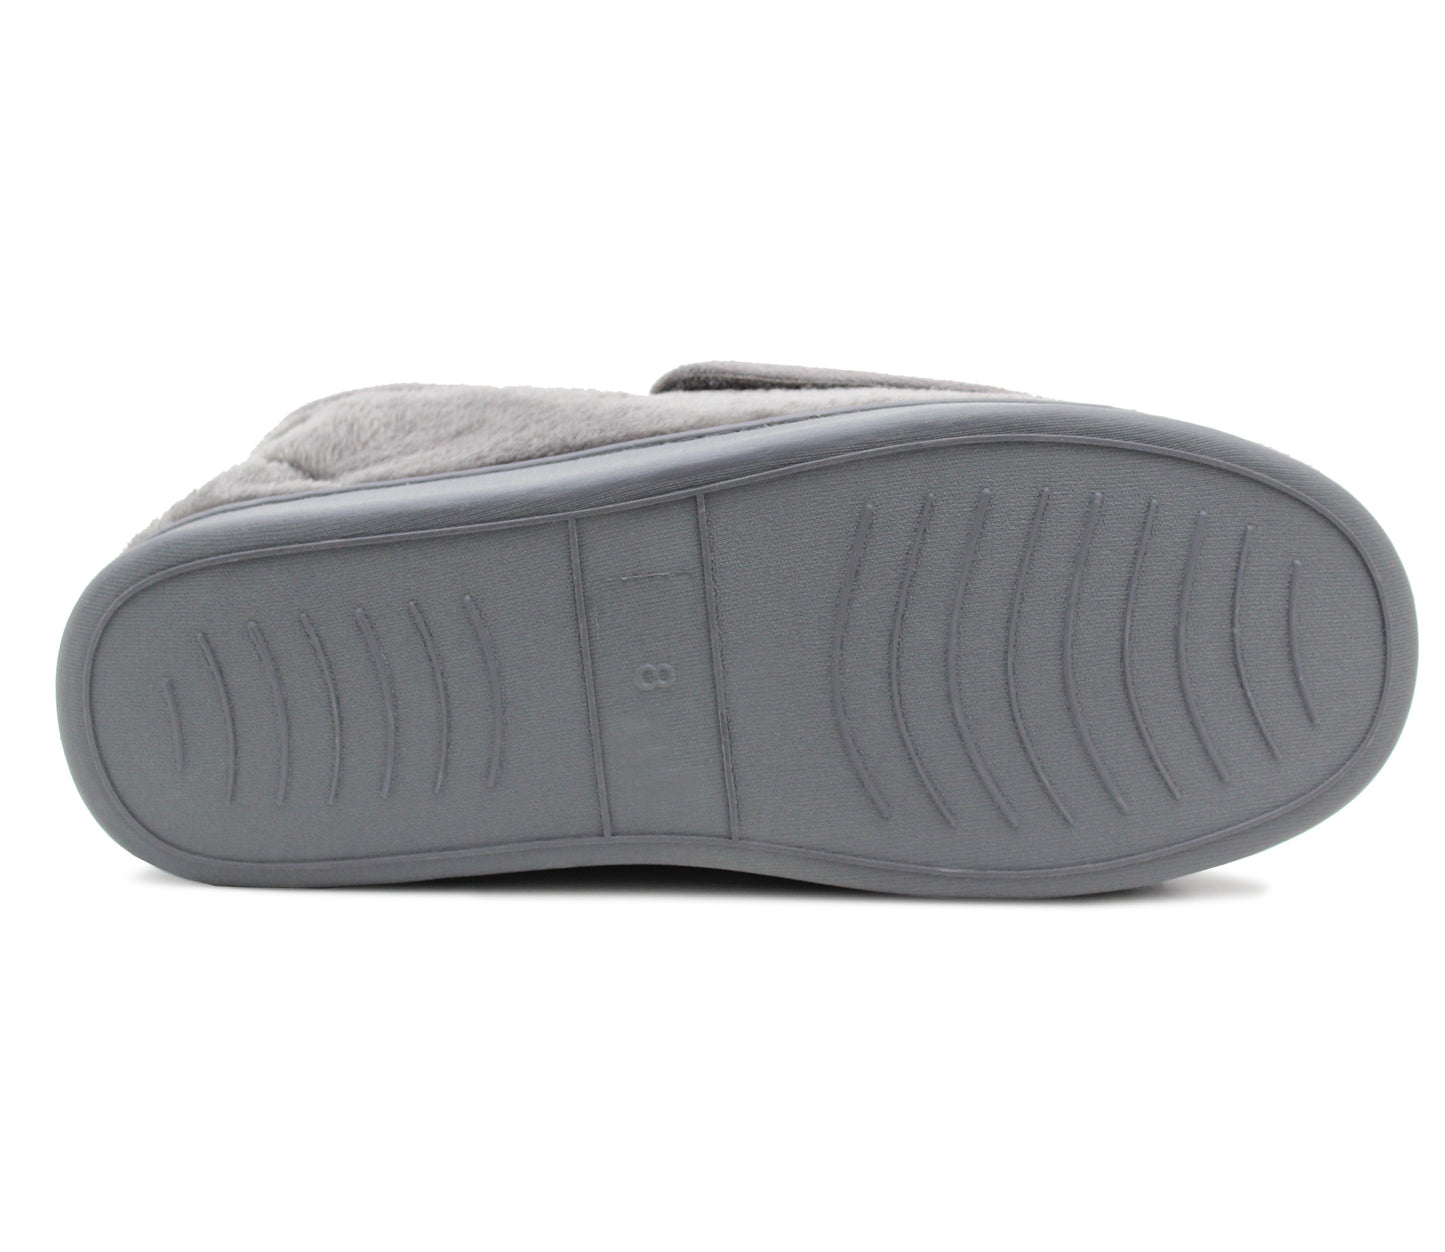 Dr Keller Mens Grey Diabetic Touch Fasten Wide Opening Slippers Lightweight Slip On Soft House Shoes